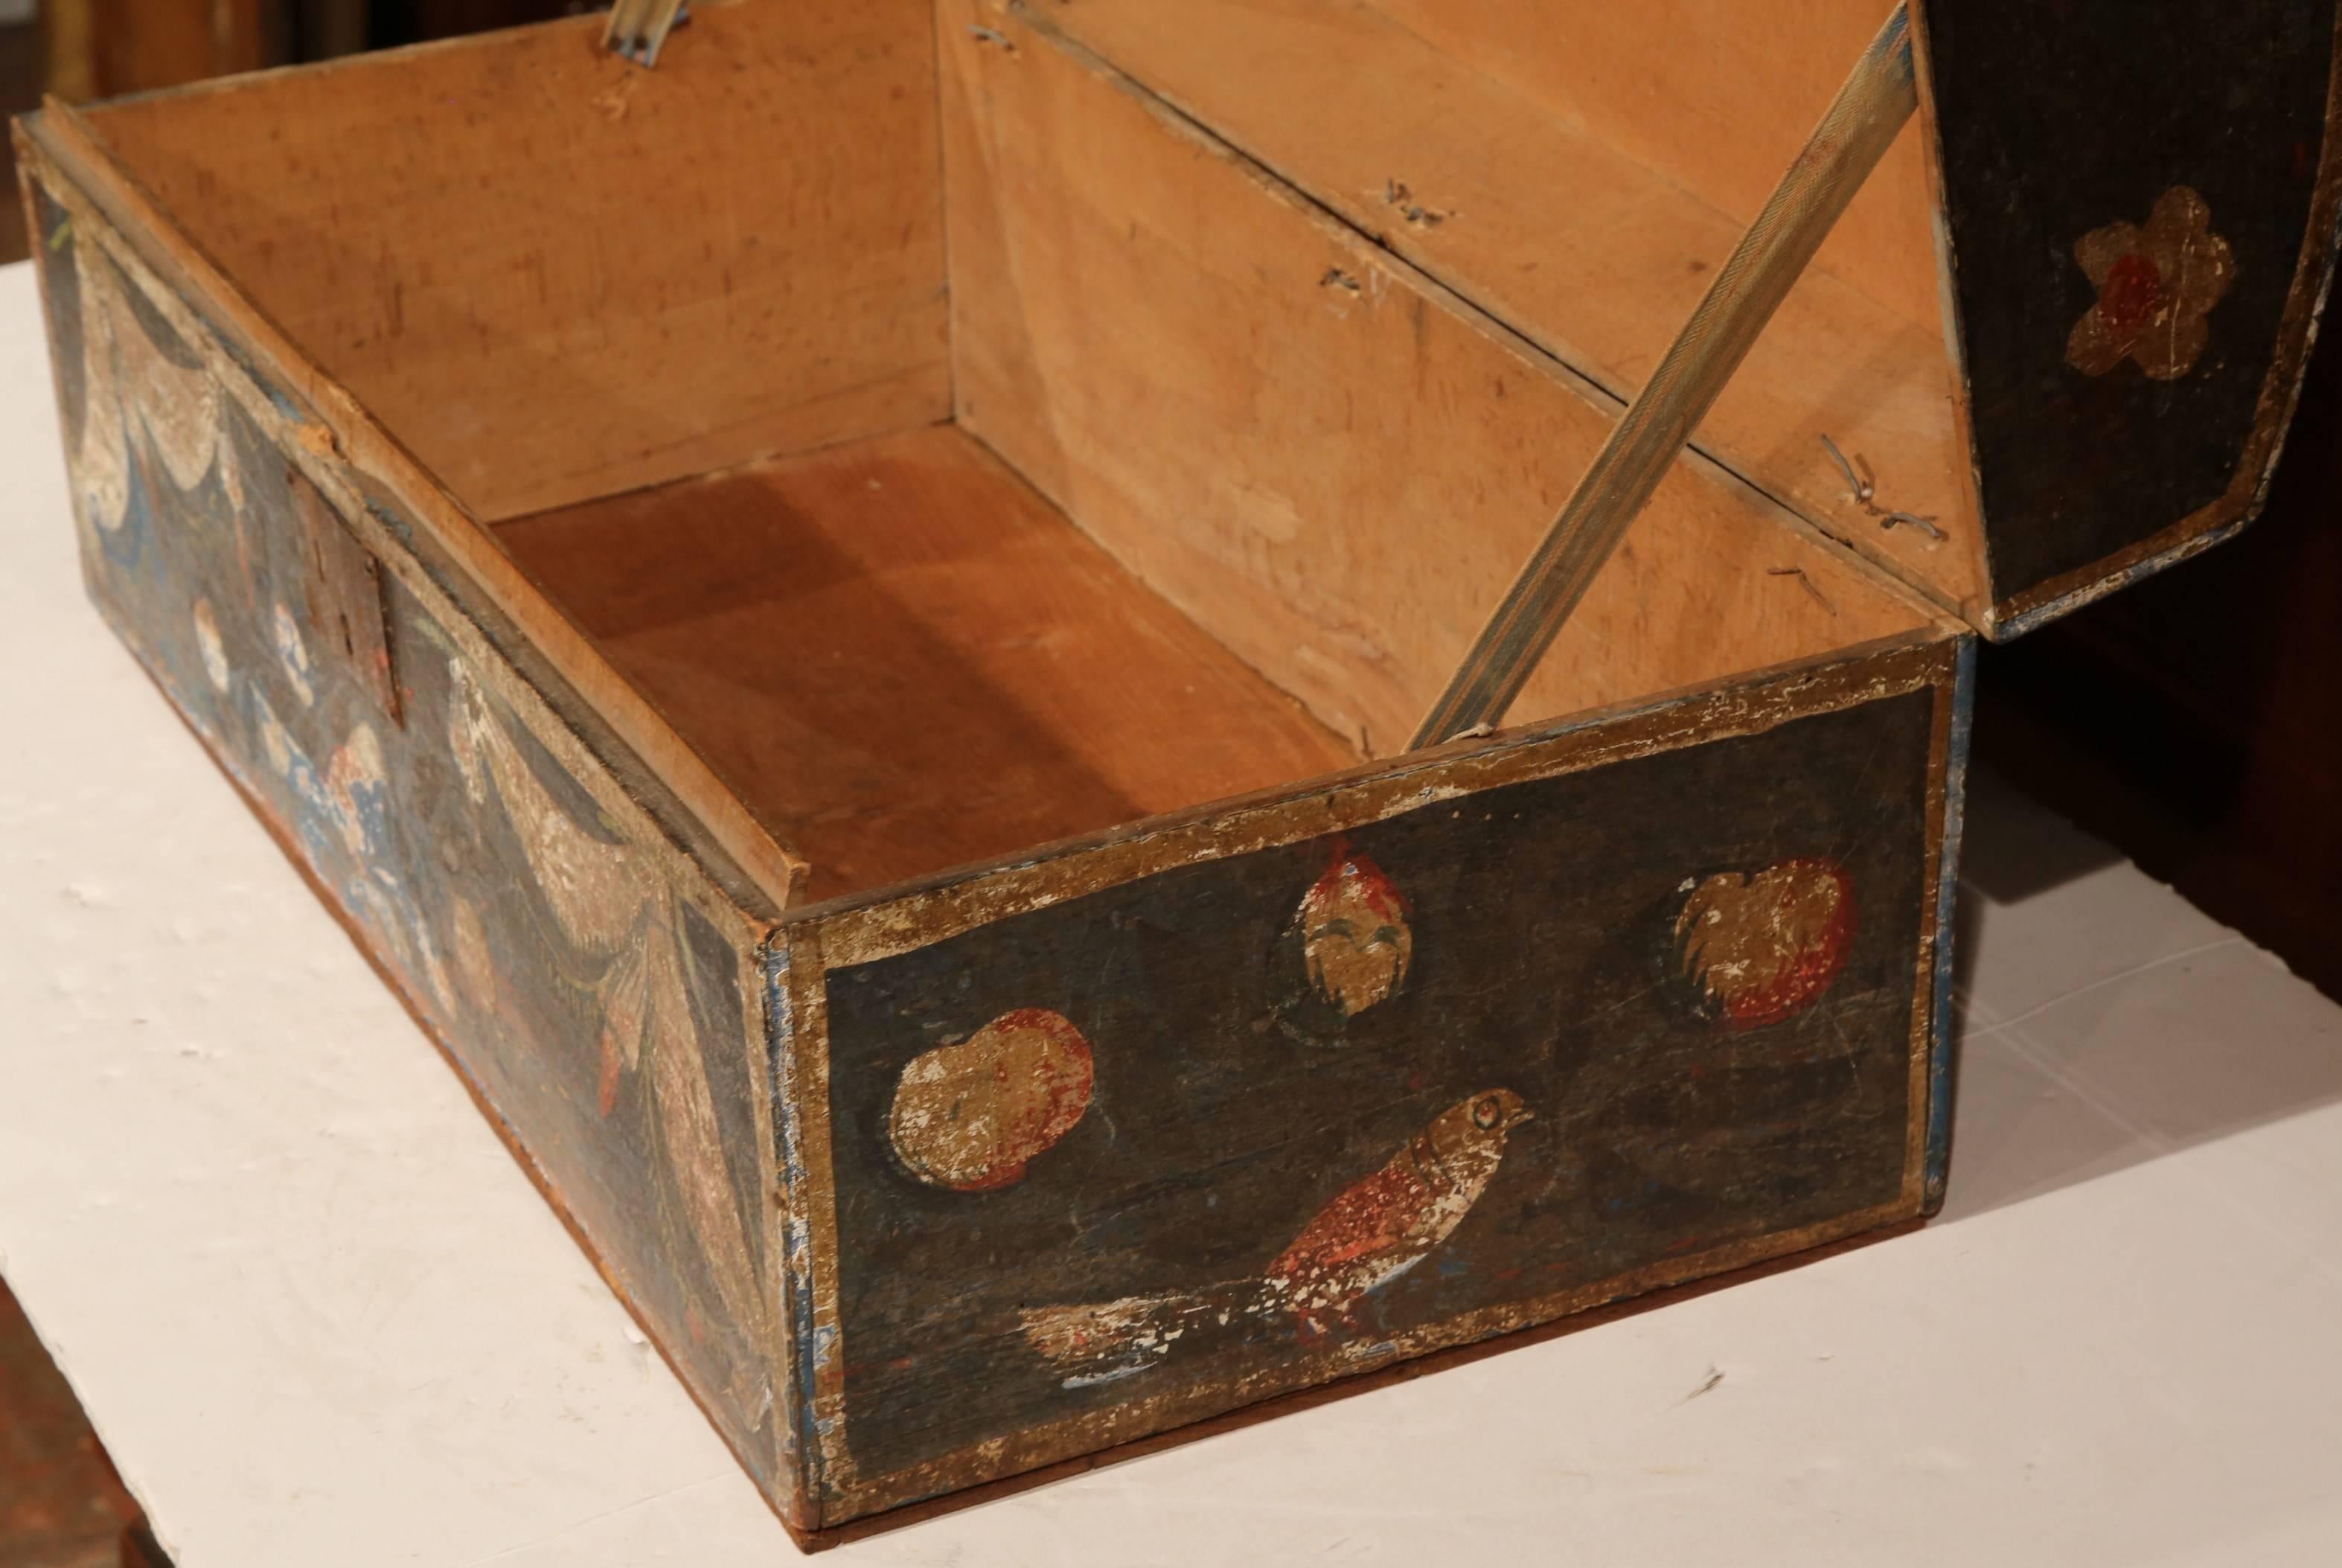 Wood 18th Century French Painted Wedding Box from Normandy with Birds and Flowers